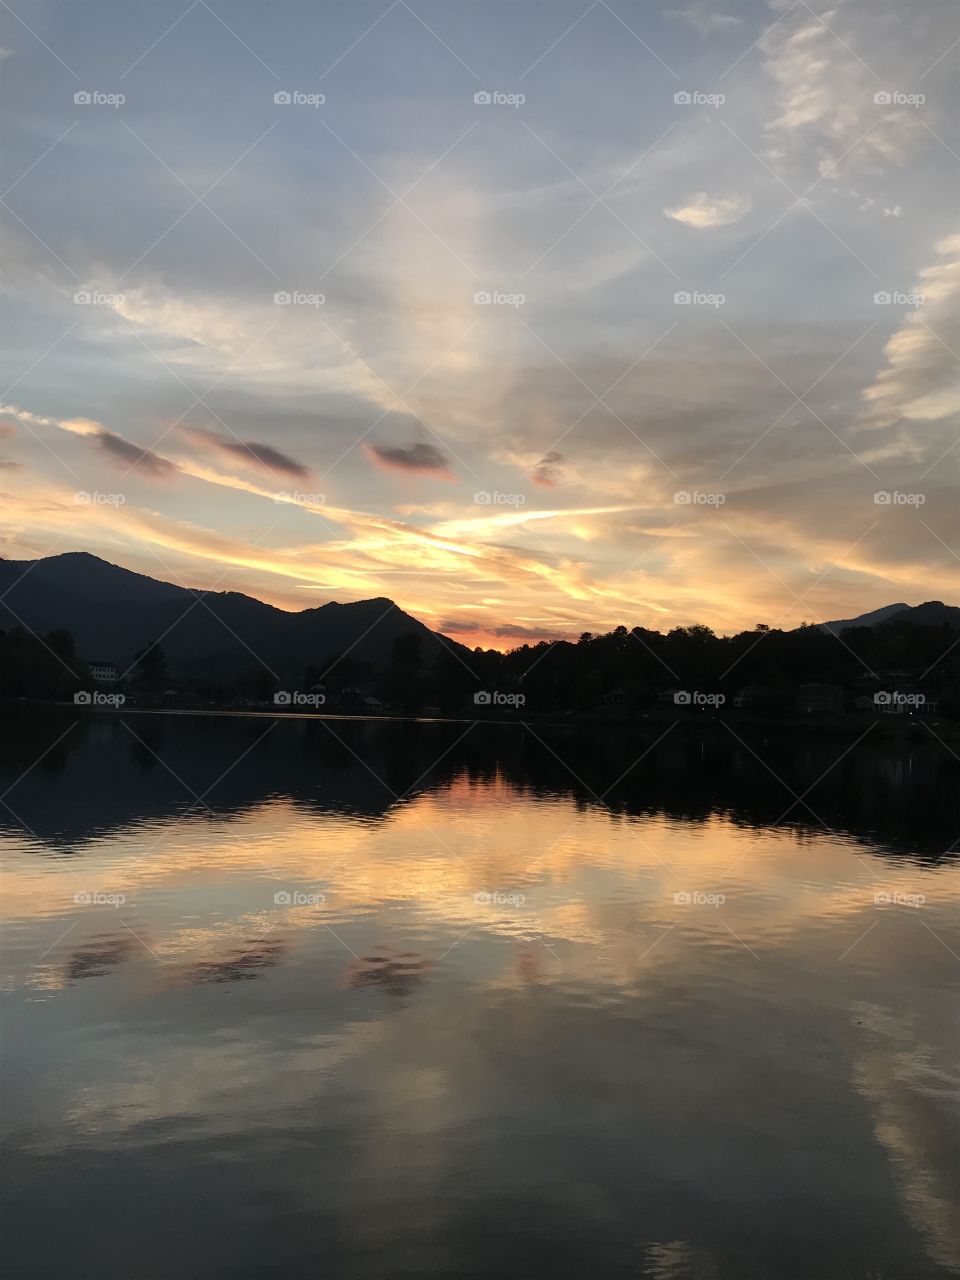 Sunset over the Mountains and across the Lake